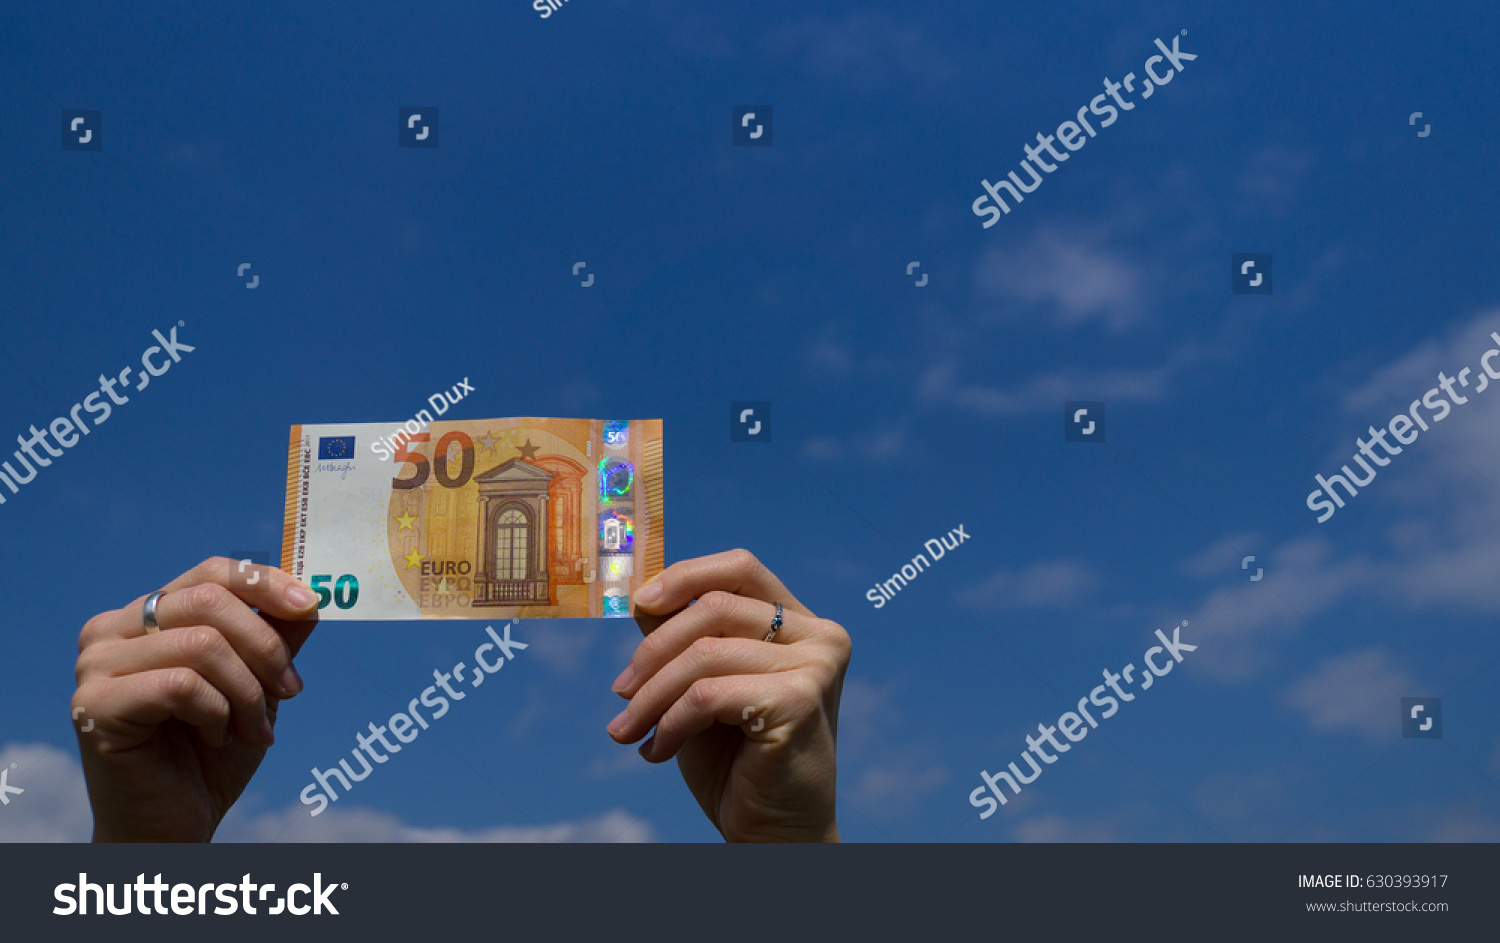 Two hands of a woman holding fifty euro banknote in the bottom left corner before blue sky outdoors #630393917